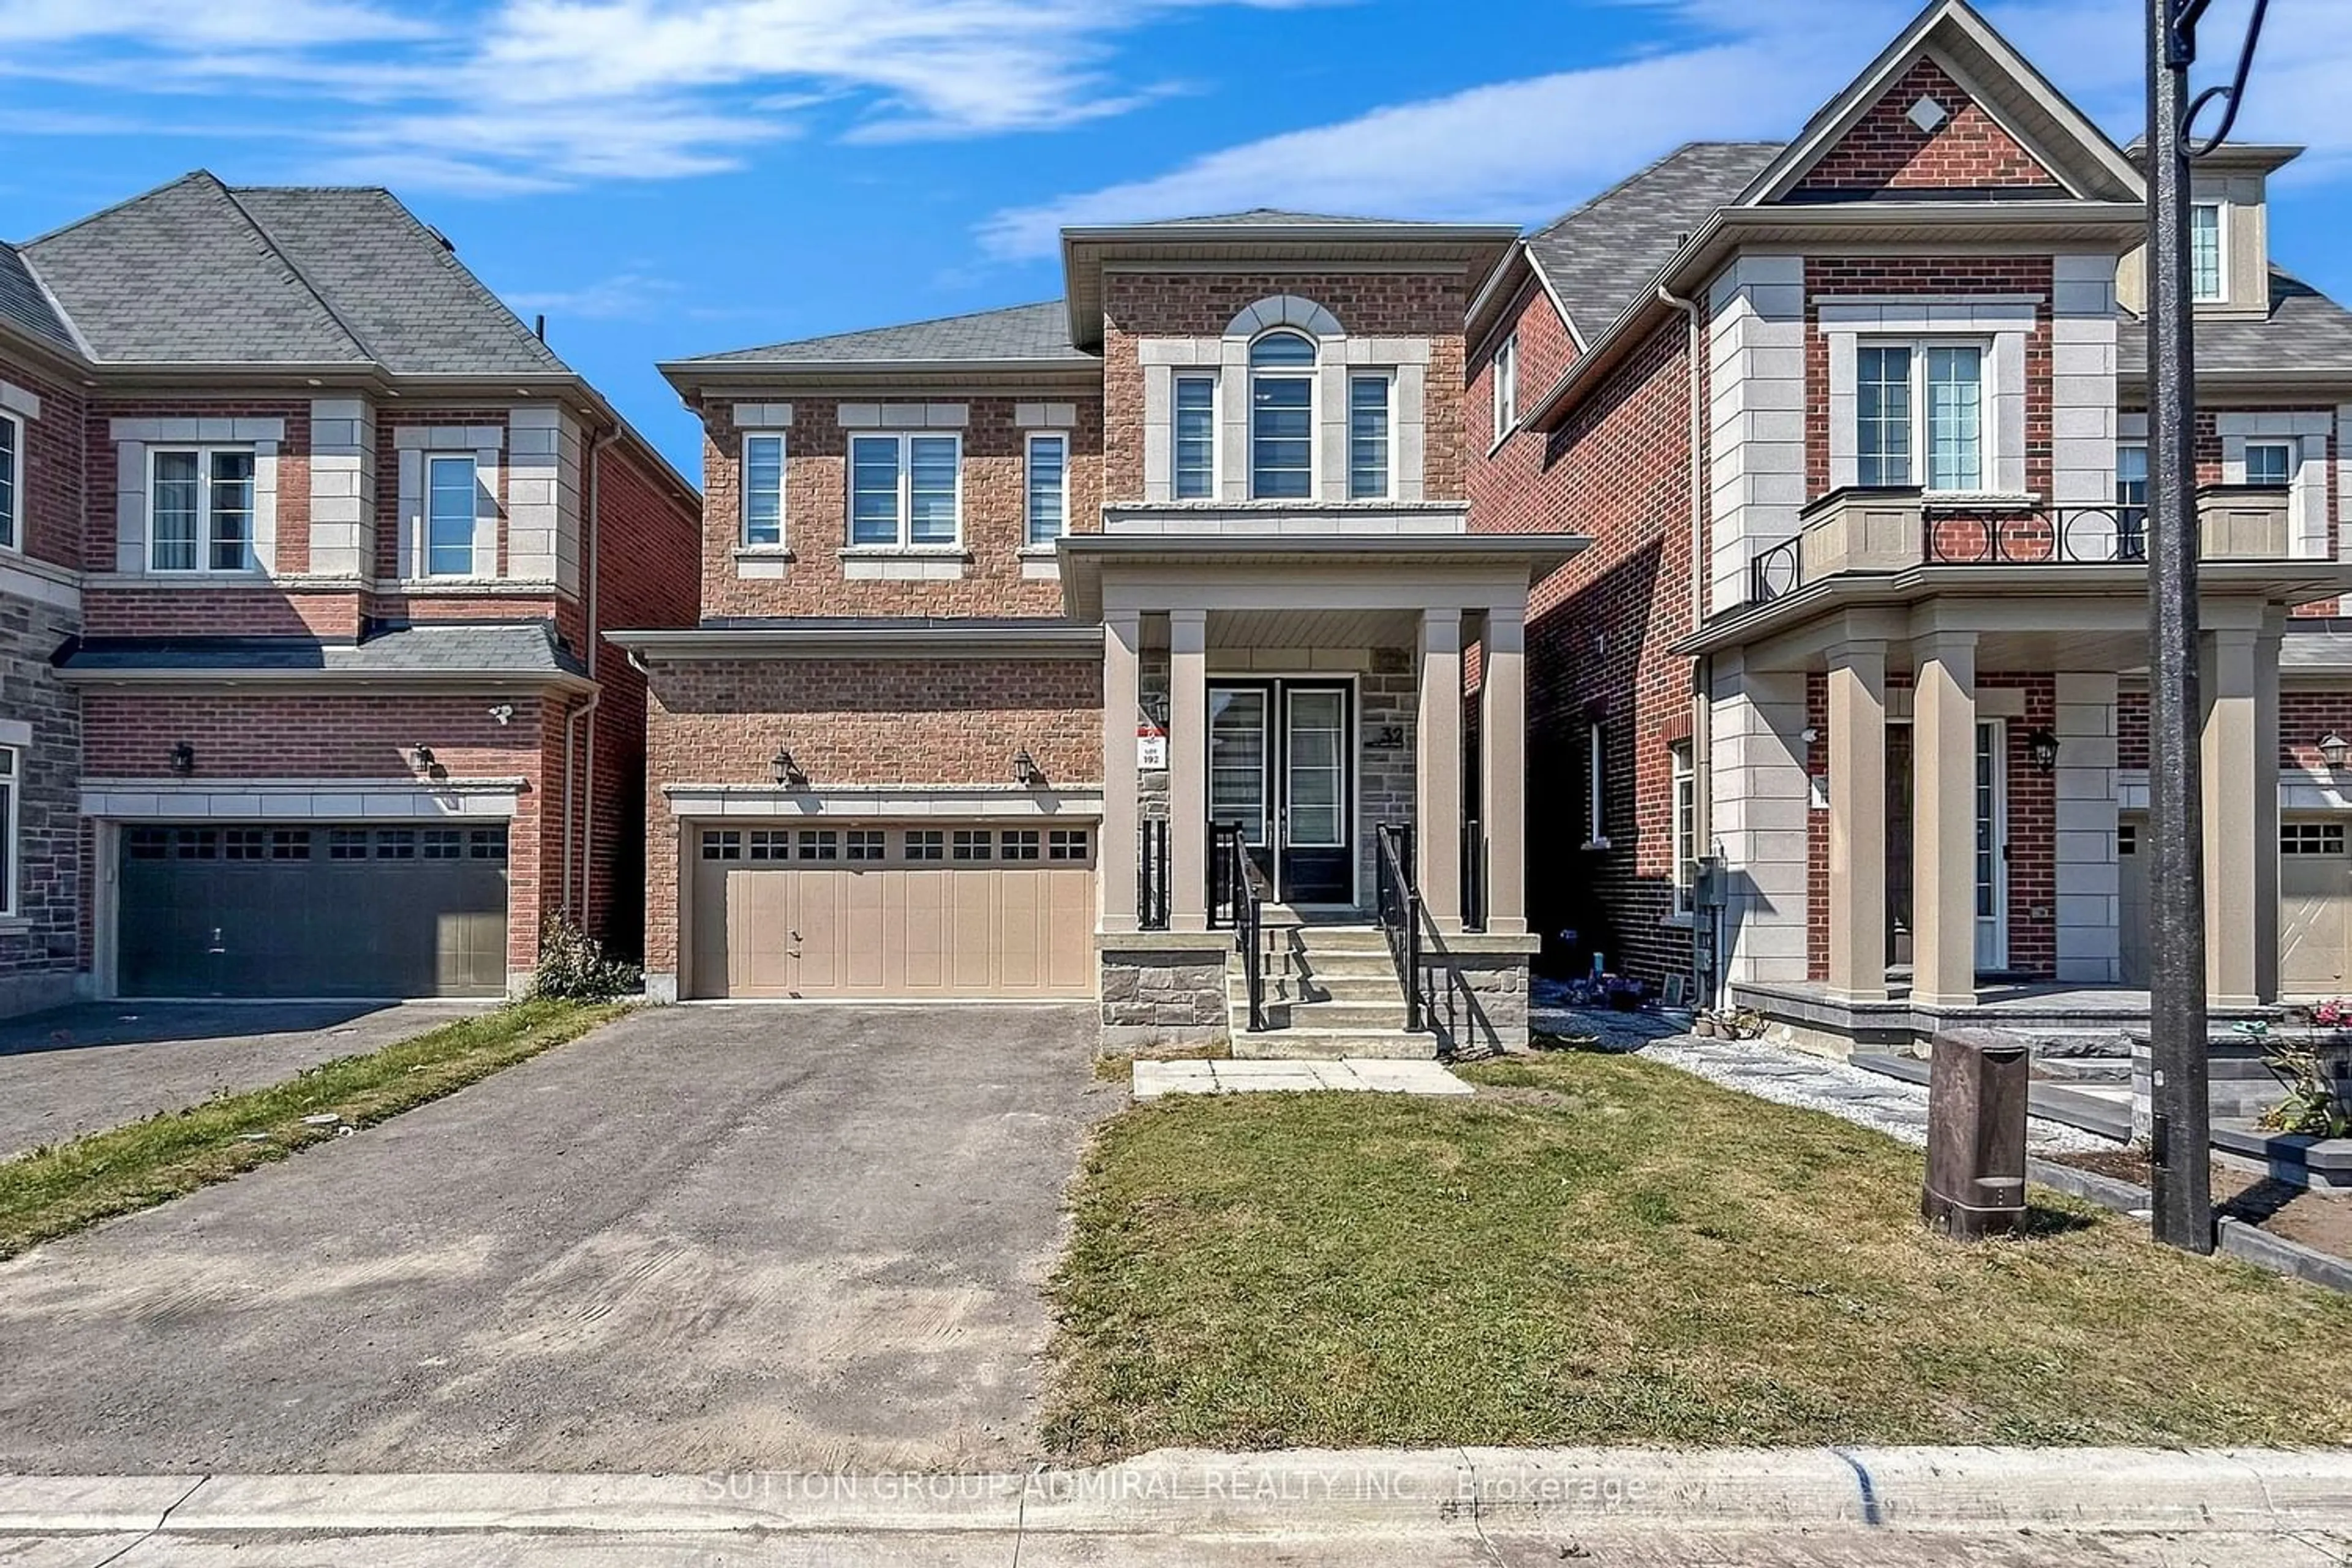 Home with brick exterior material for 32 Red Giant St, Richmond Hill Ontario L4C 4Y4